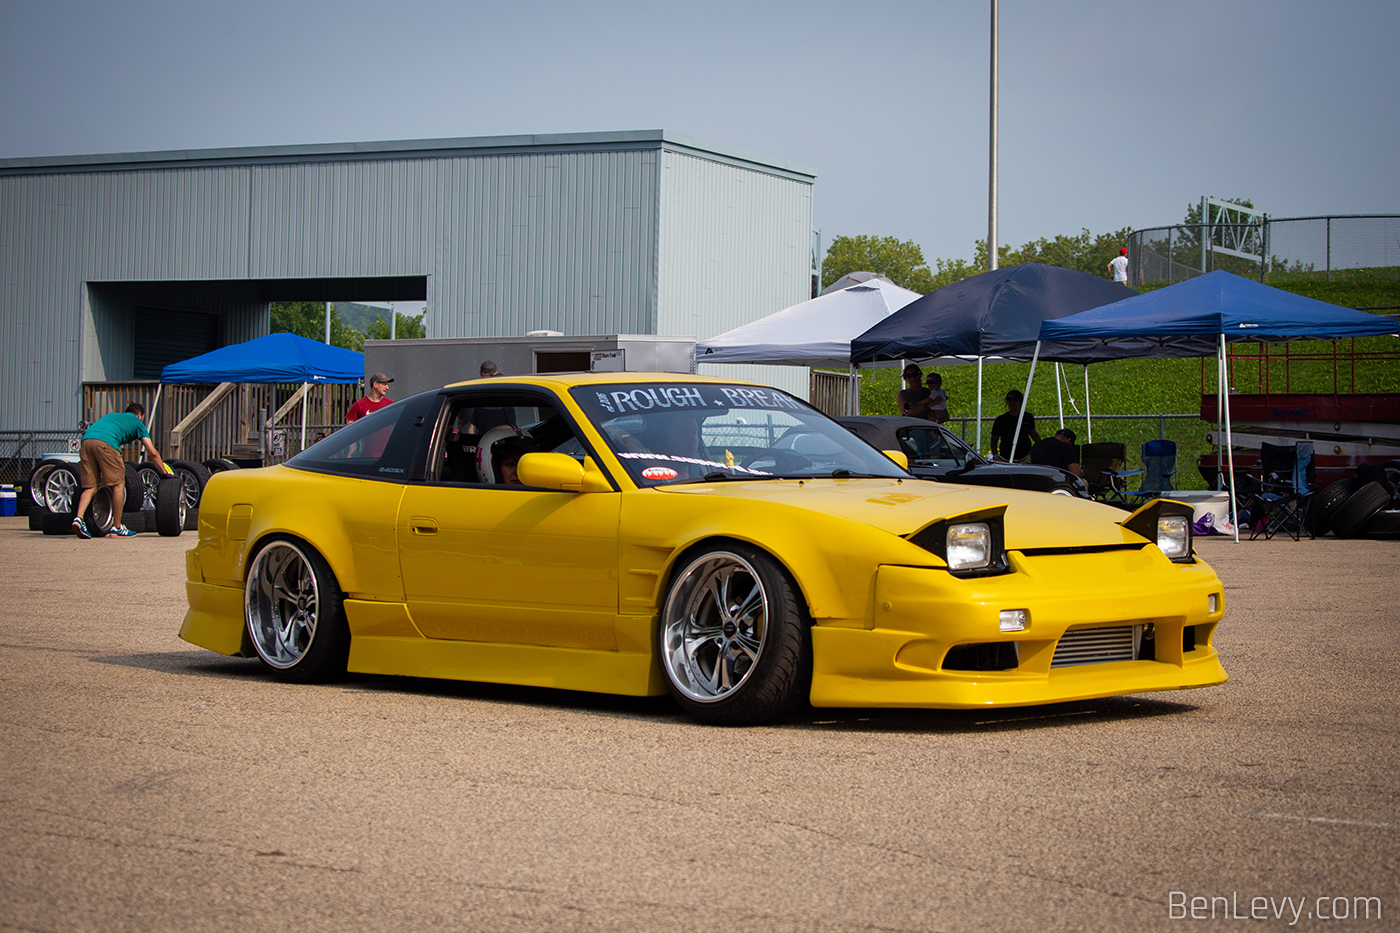 Yellow S13 240SX at Final Bout in Wisconsin